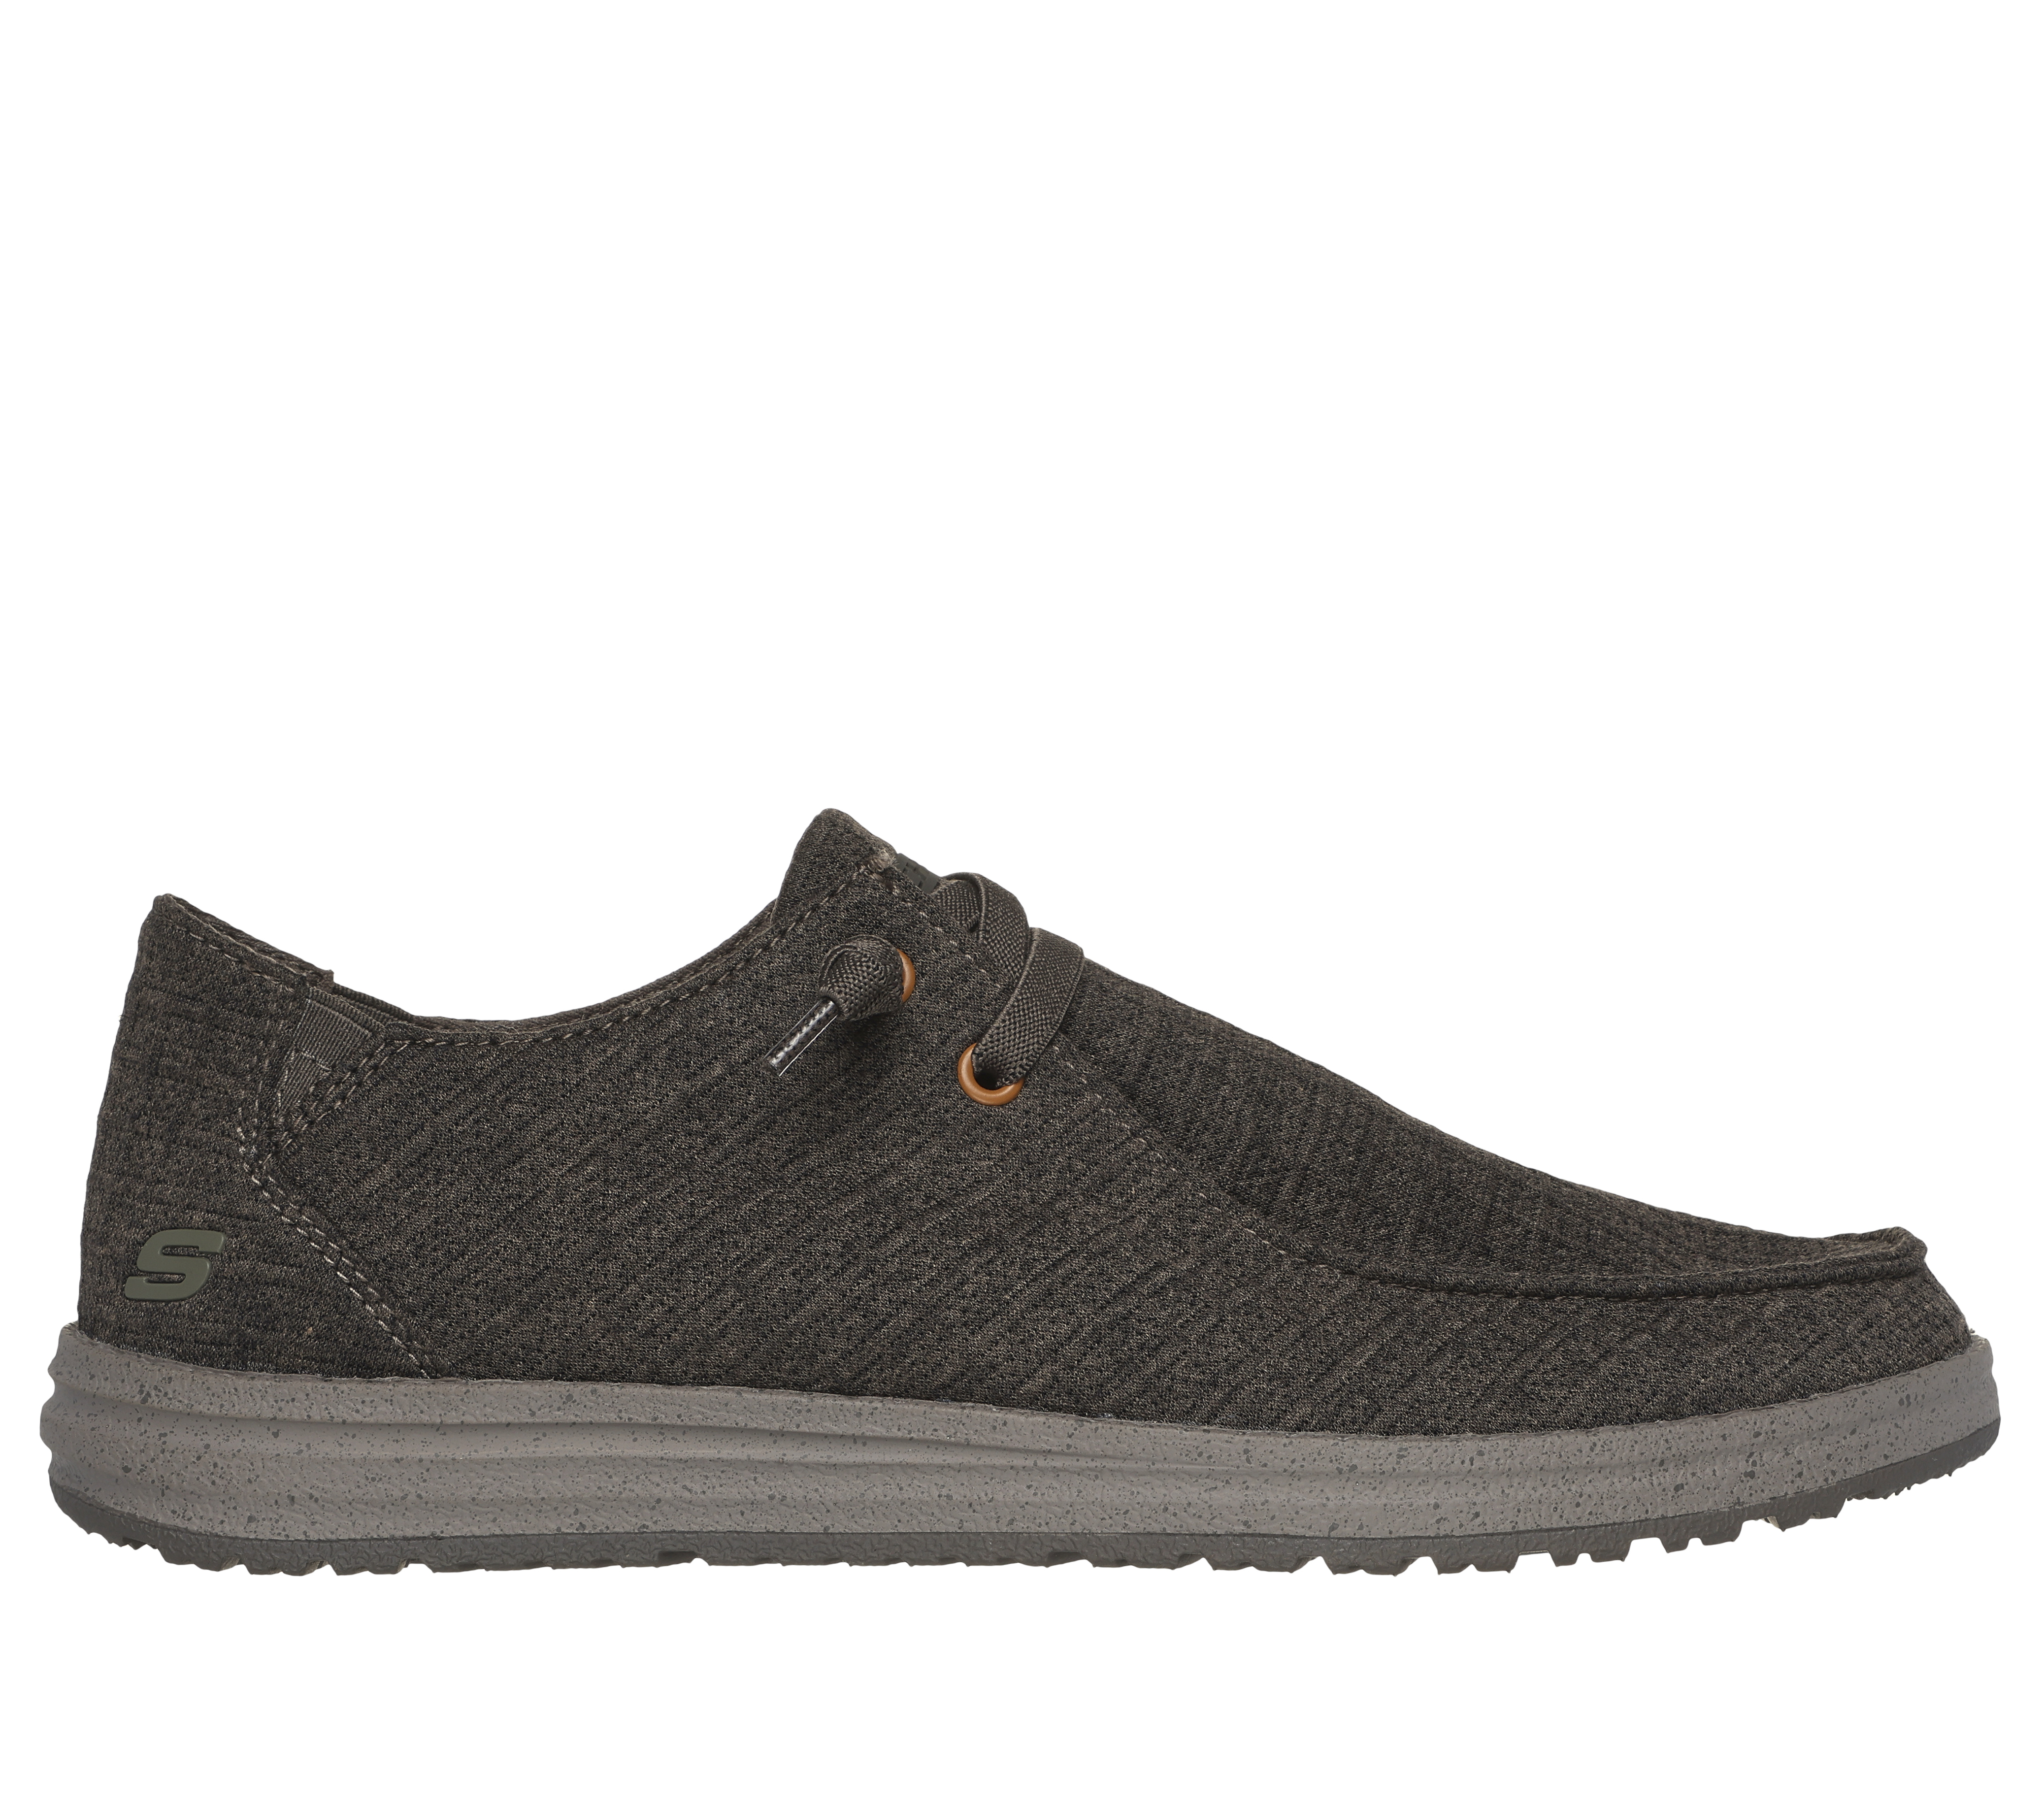 Relaxed - SKECHERS Fit: Quinland | Melson